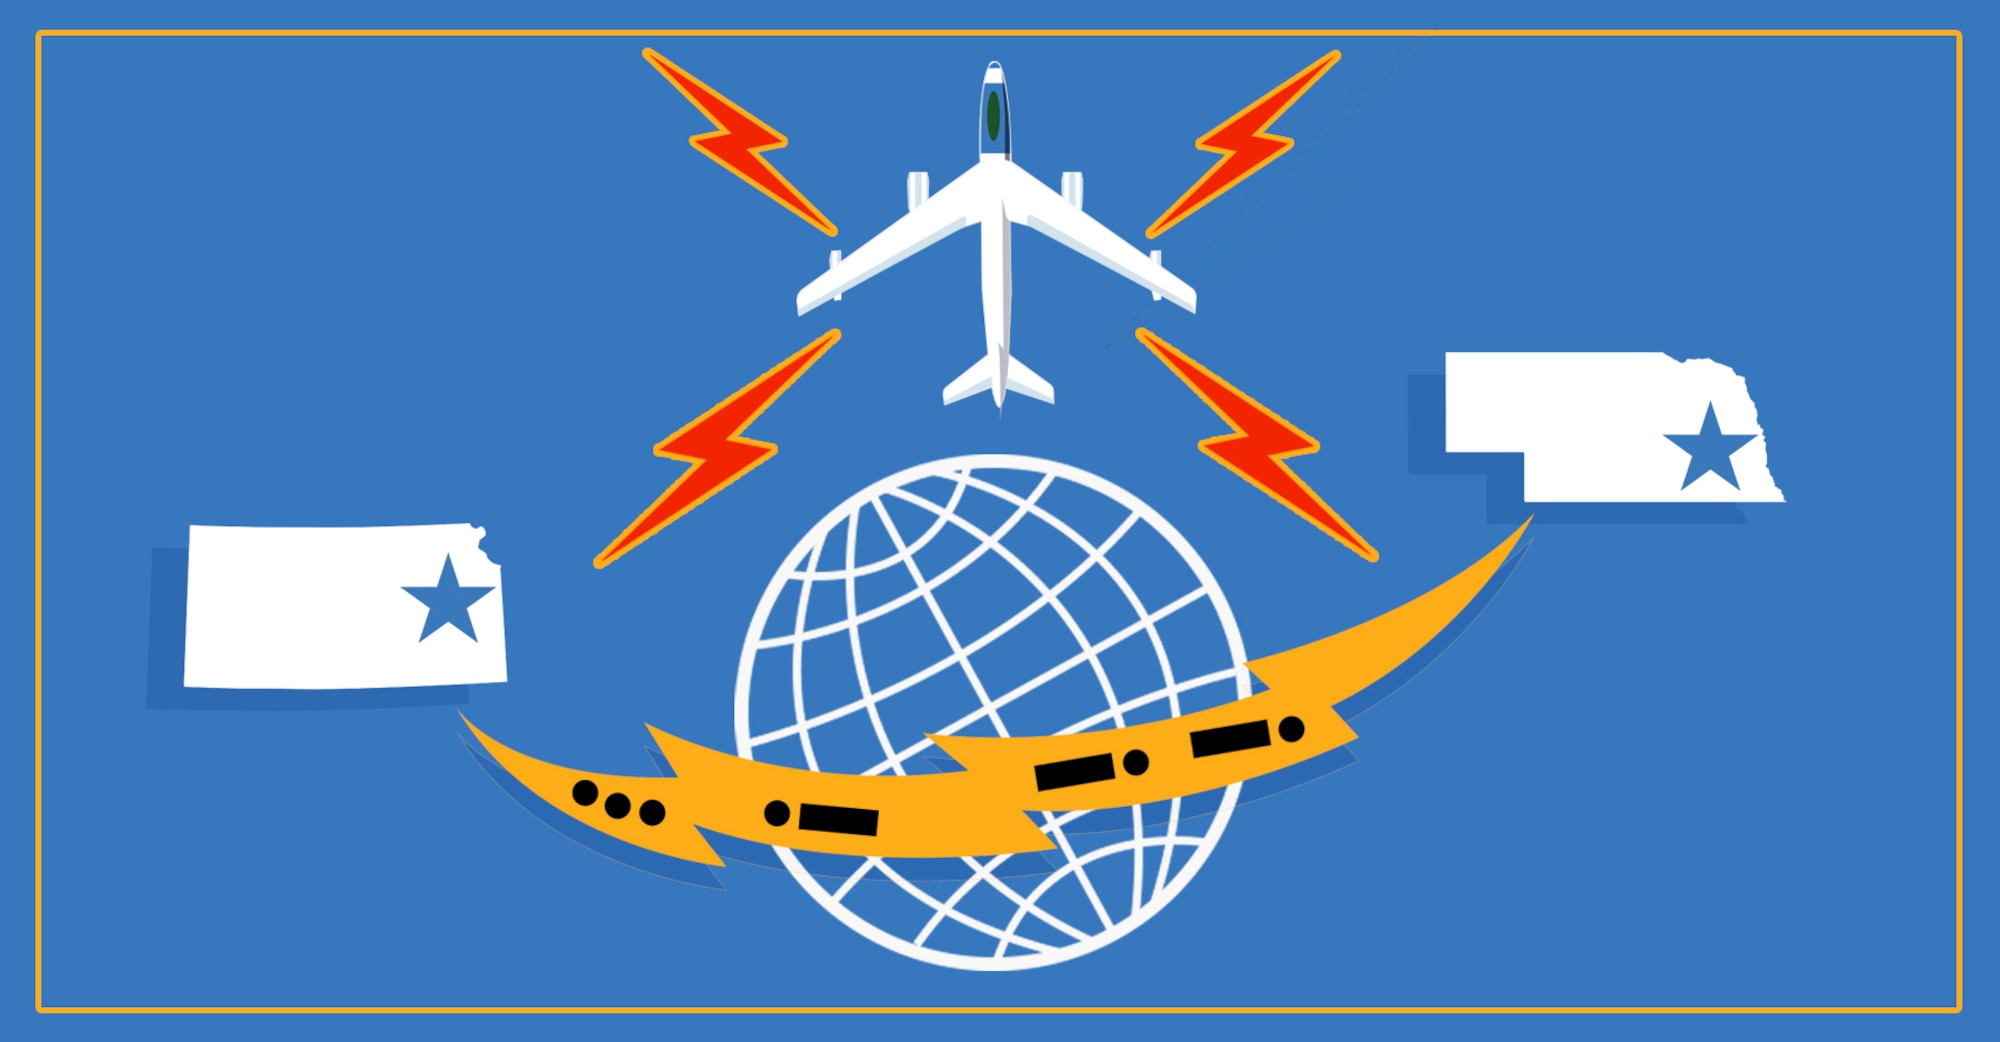 Graphic with blue background showing the shapes of the states of Kansas and Nebraska and one of our aircraft to show the wing's history.